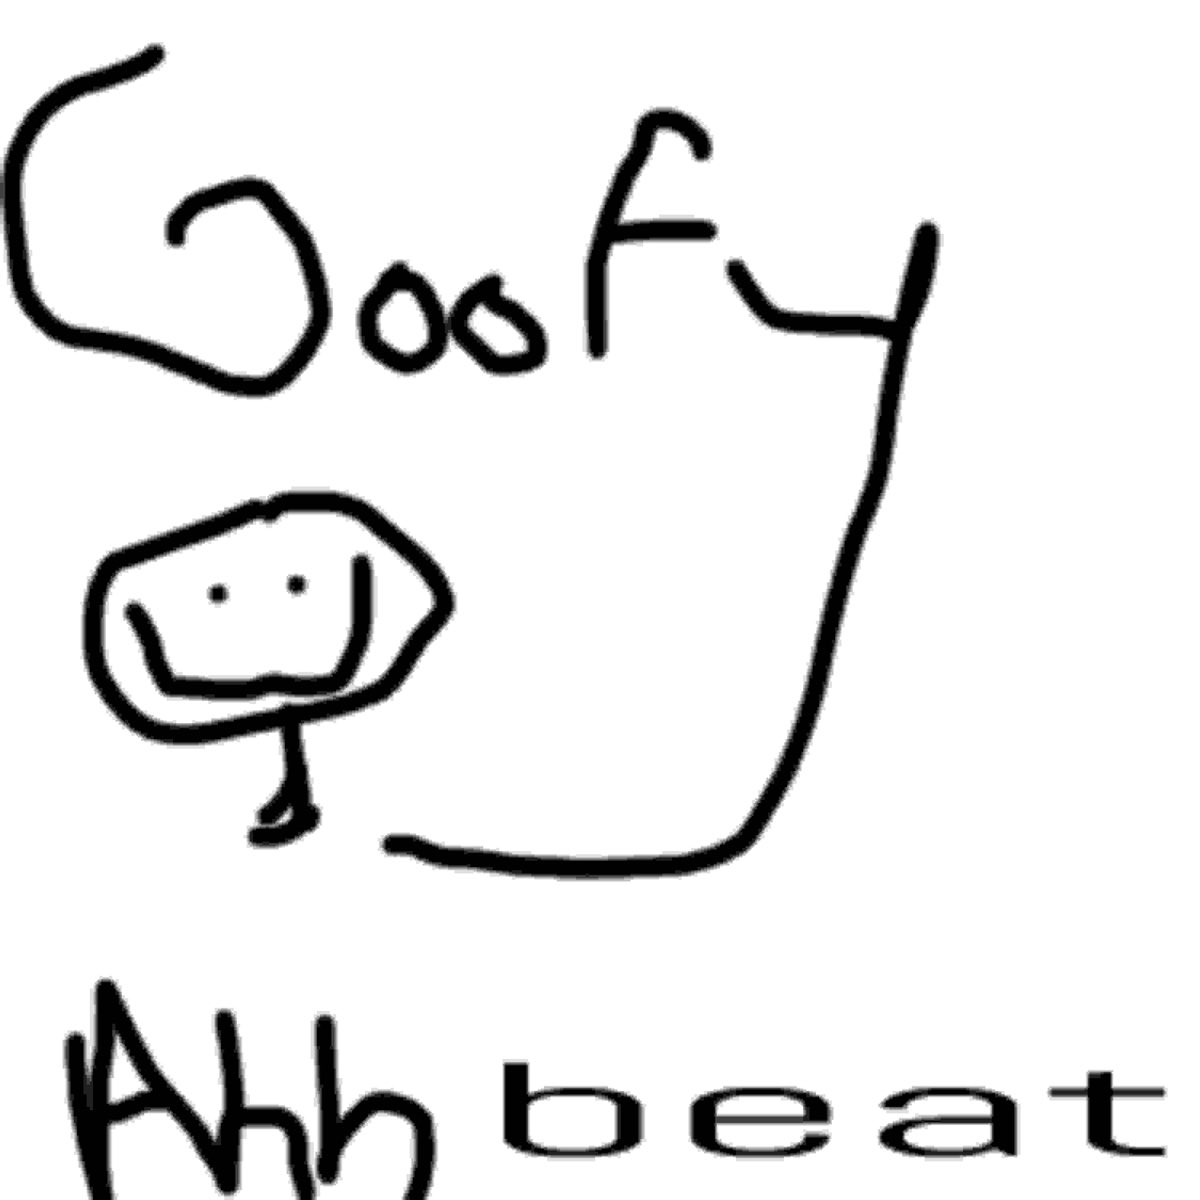 ULTIMATE GOOFY AHH BEAT Sound Clip - Voicy